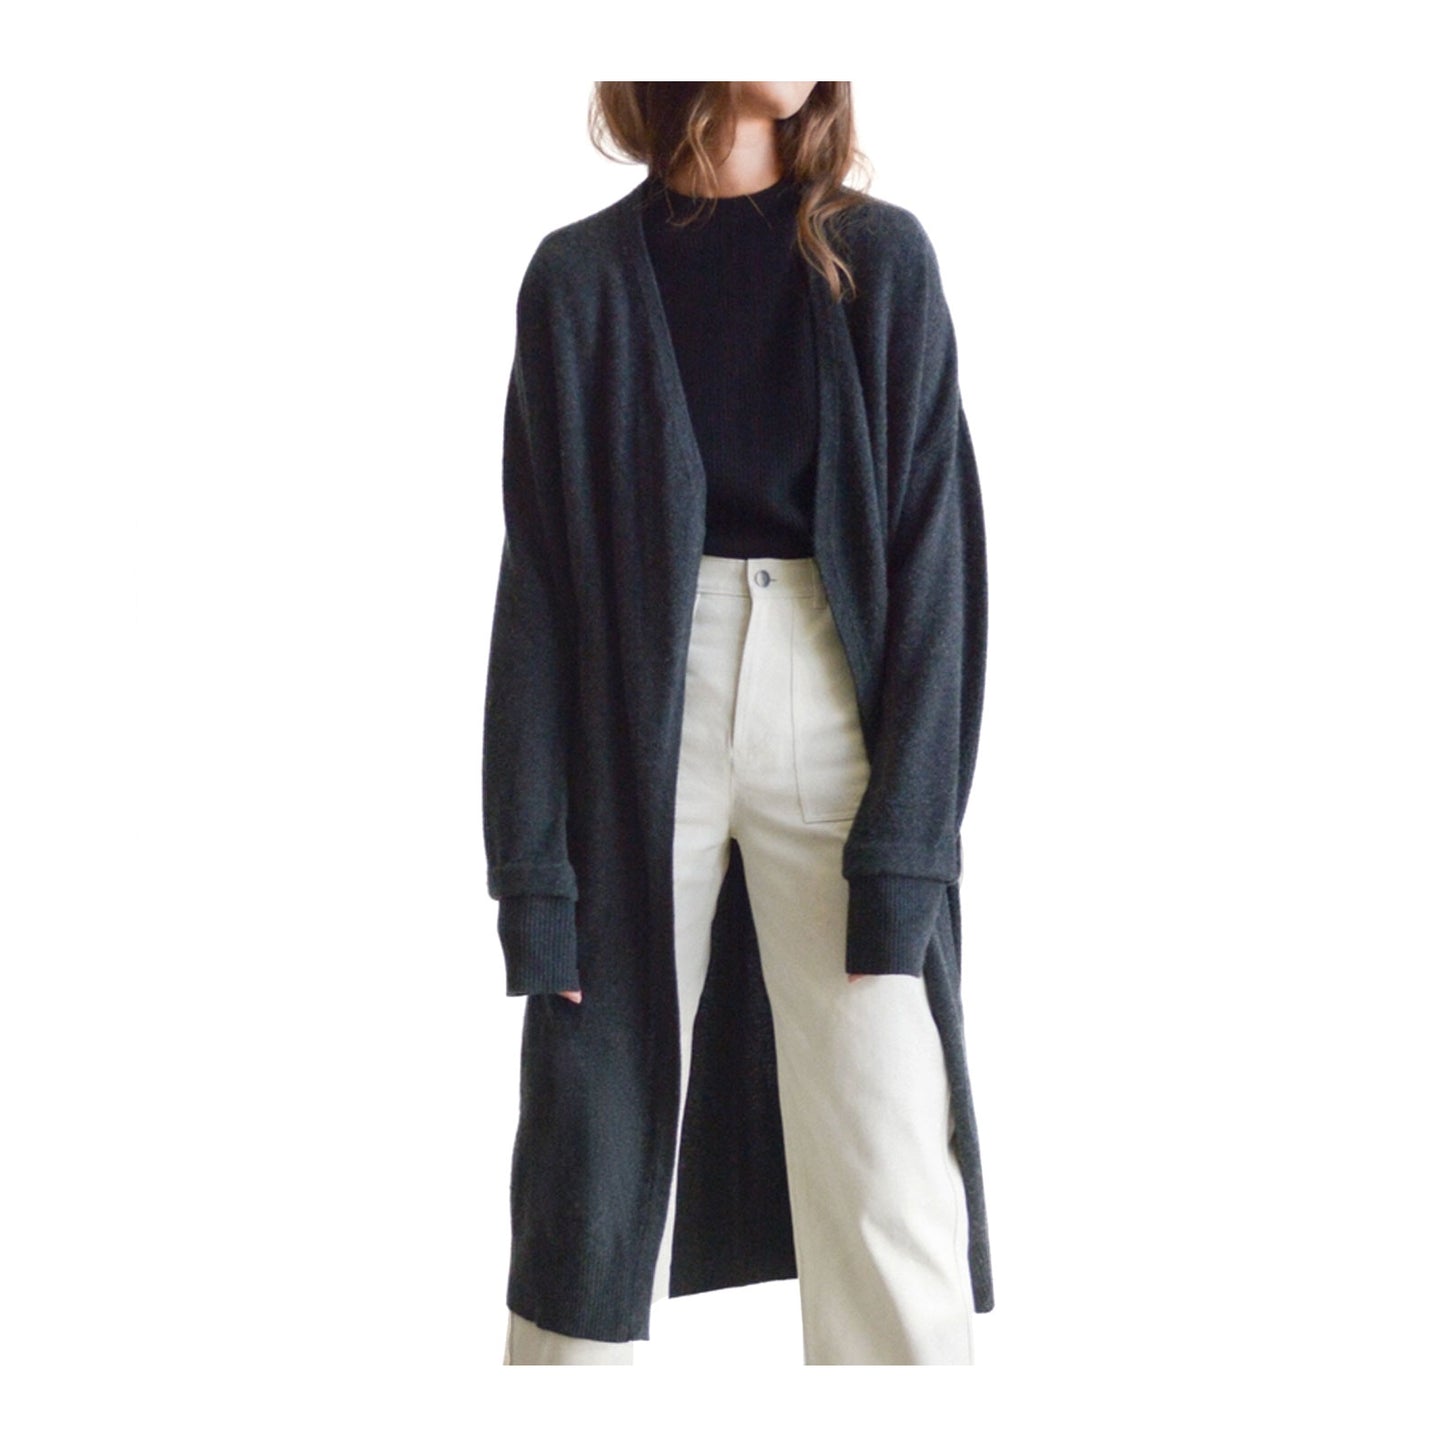 Cashmere Long Cardigan in Charcoal